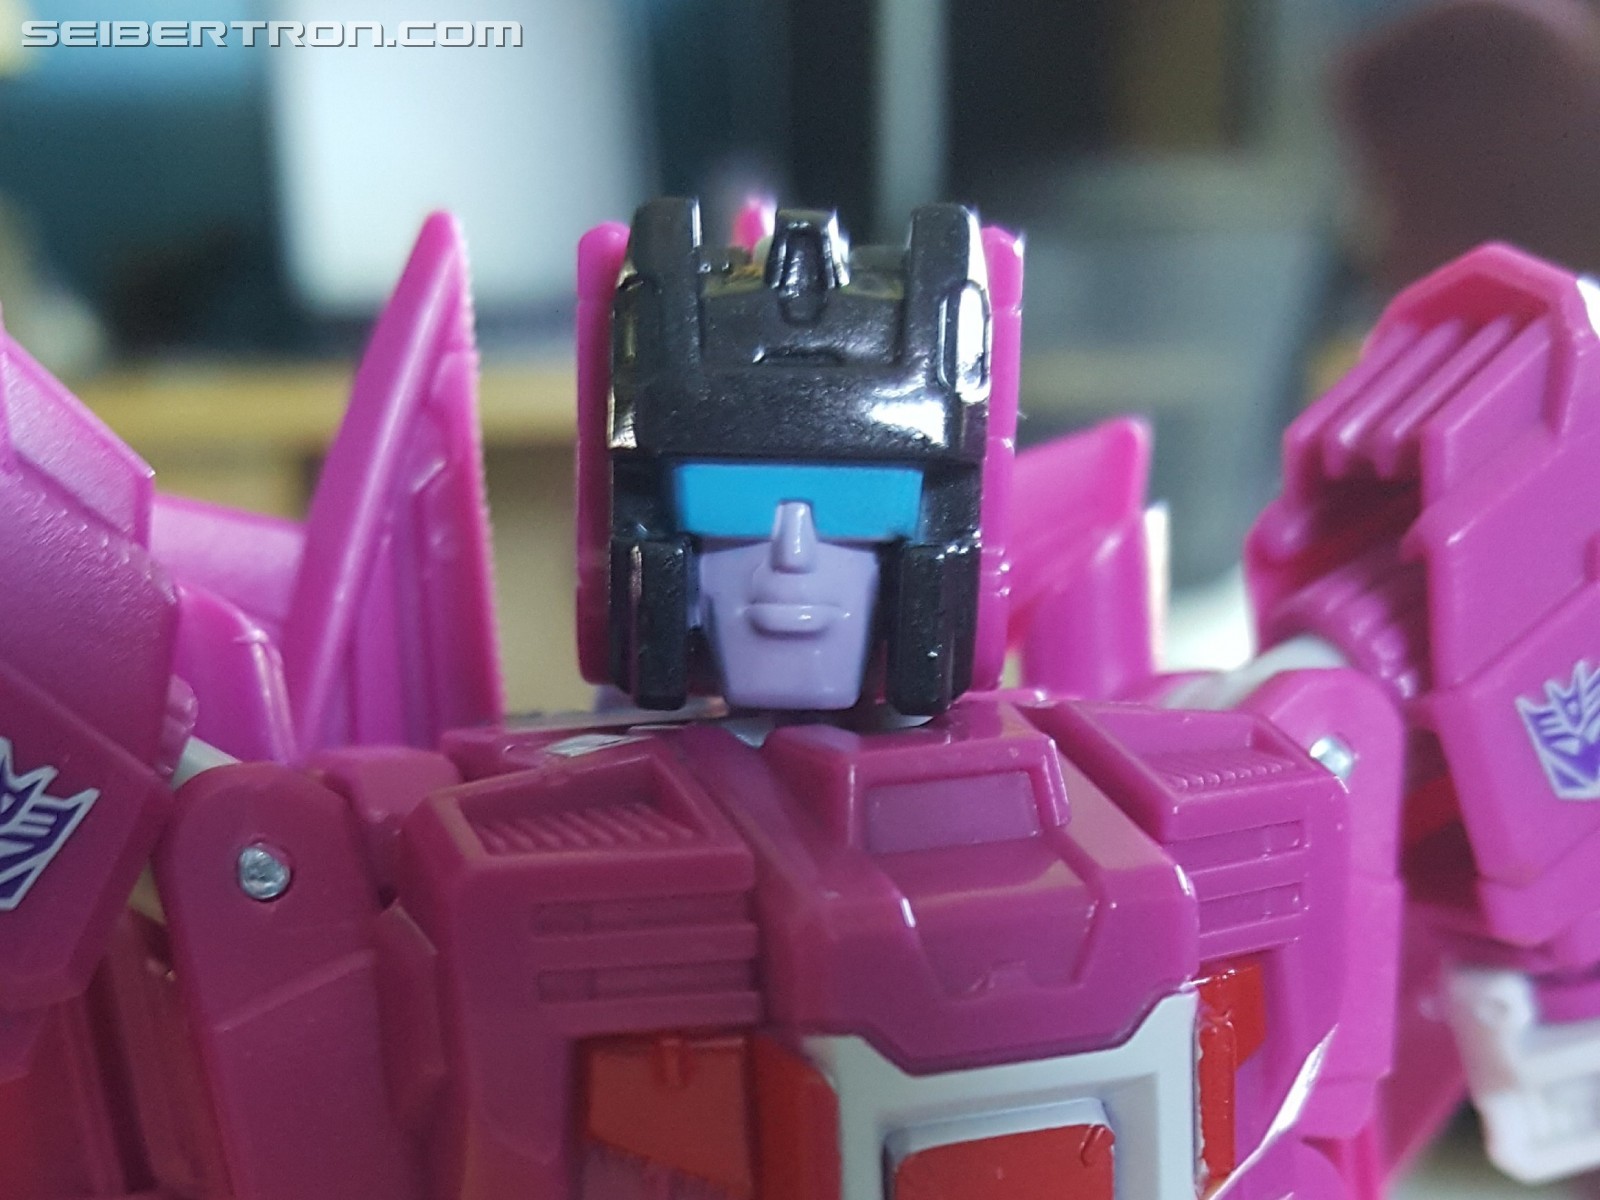 Pictorial Review of Transformers Titans Return Deluxe Misfire